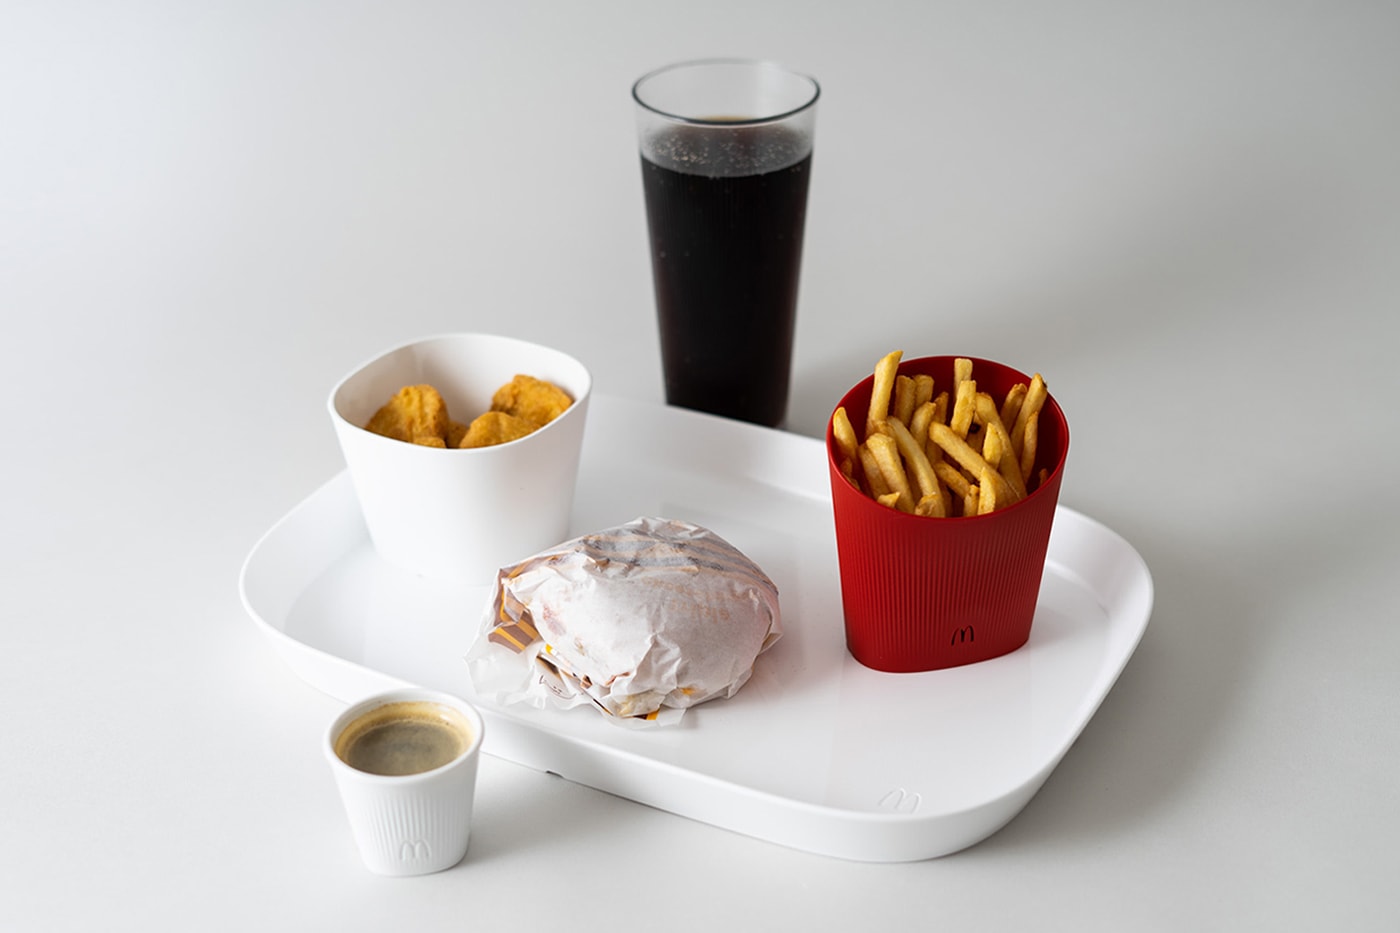 France ban disposable plastic cups and plates